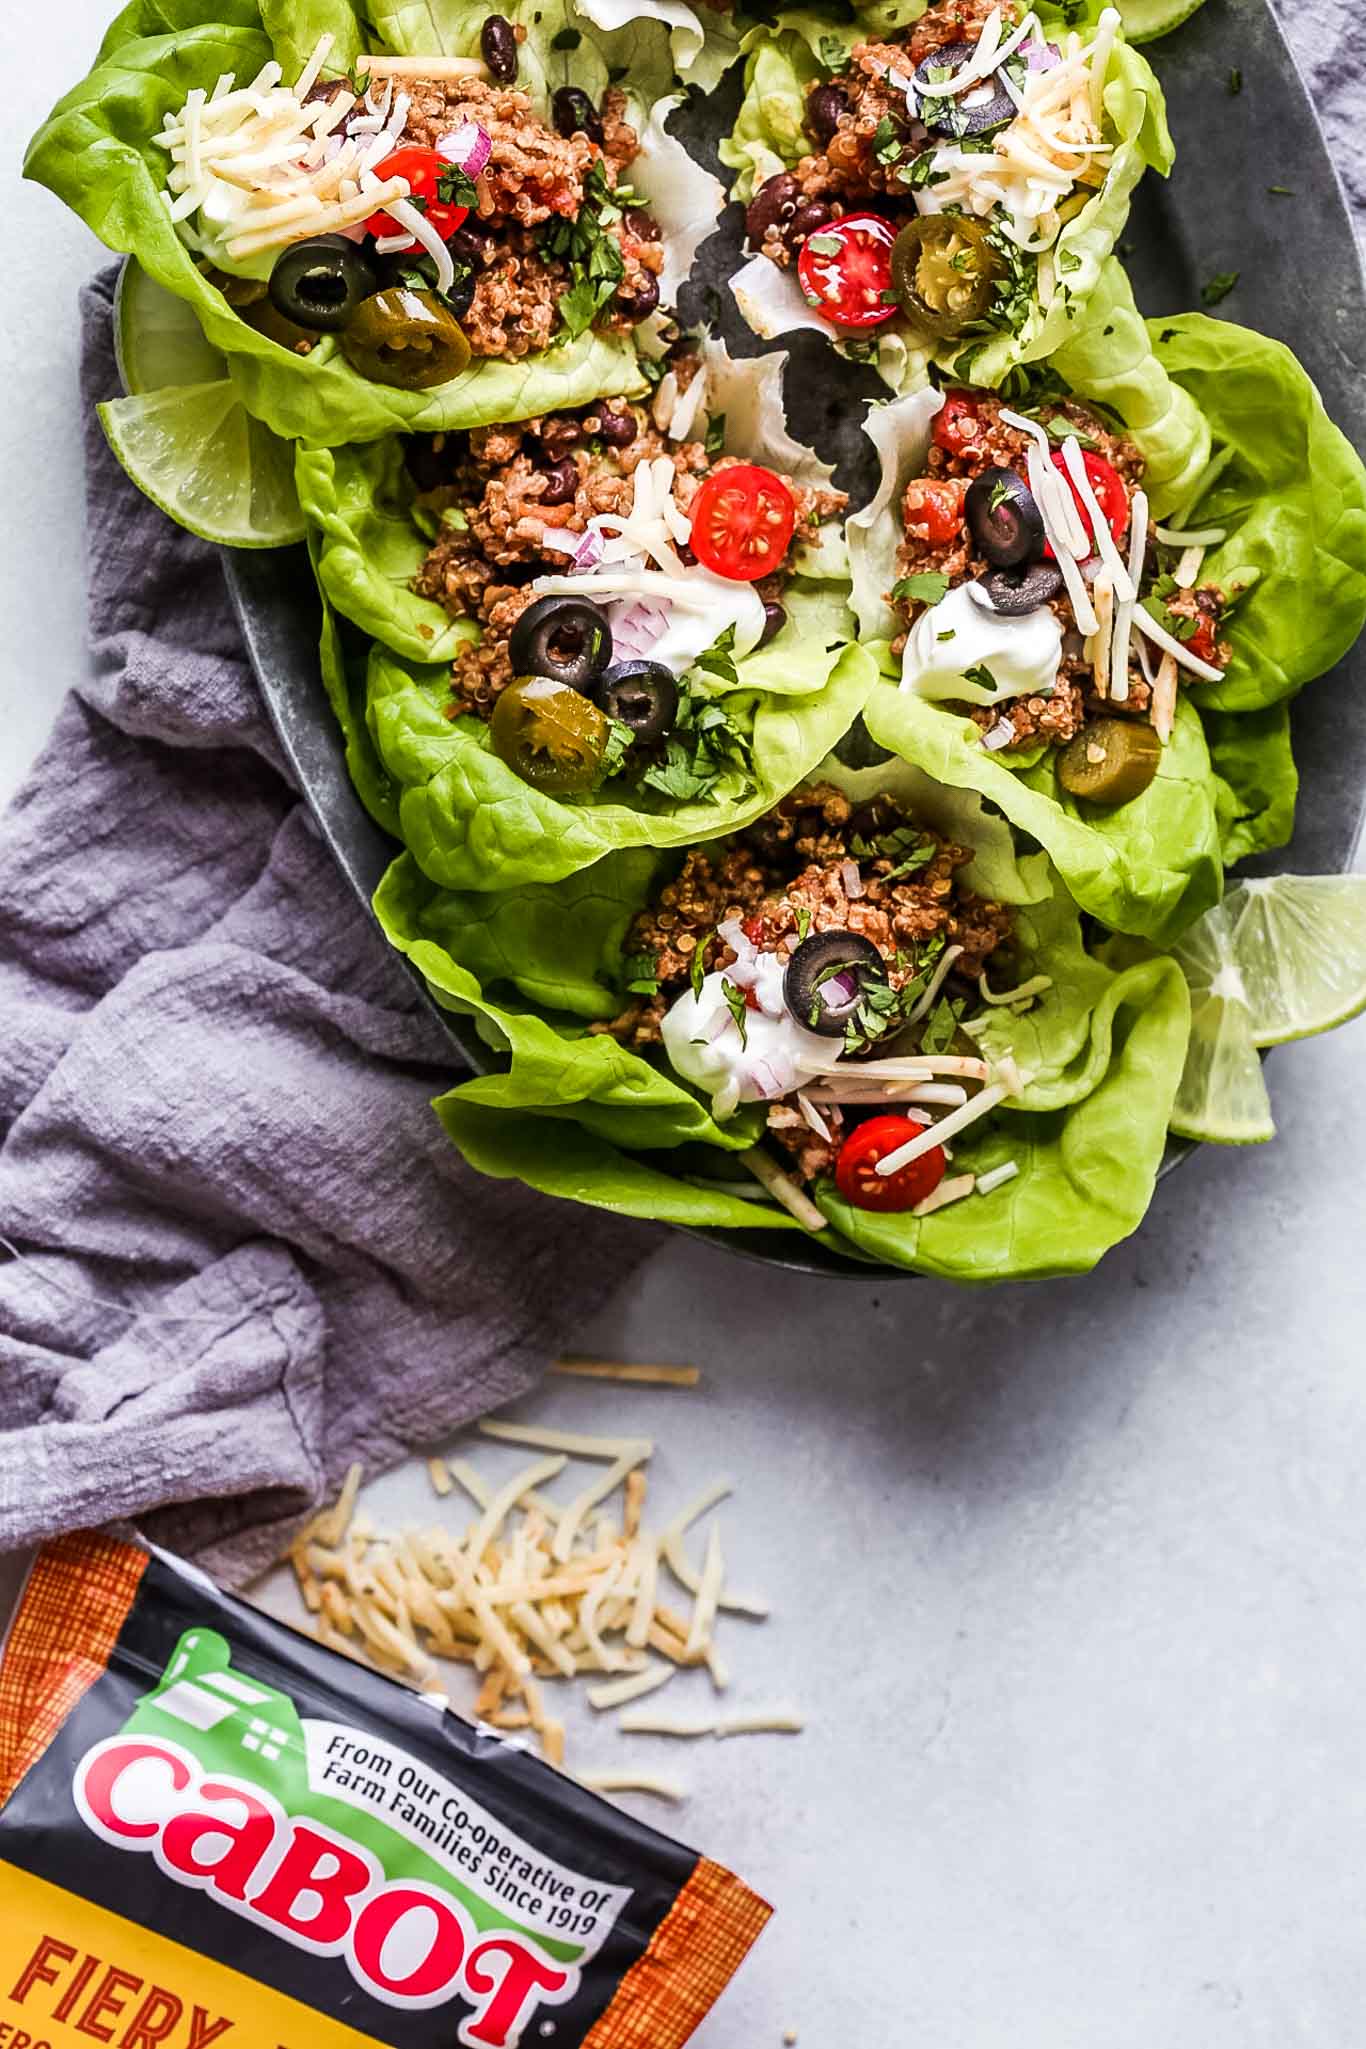 Taco Quinoa & Turkey Lettuce Wraps make a hearty, healthy, protein packed meal that’s amazingly delicious and quick and easy to prepare. They’re perfect for meal prep too.